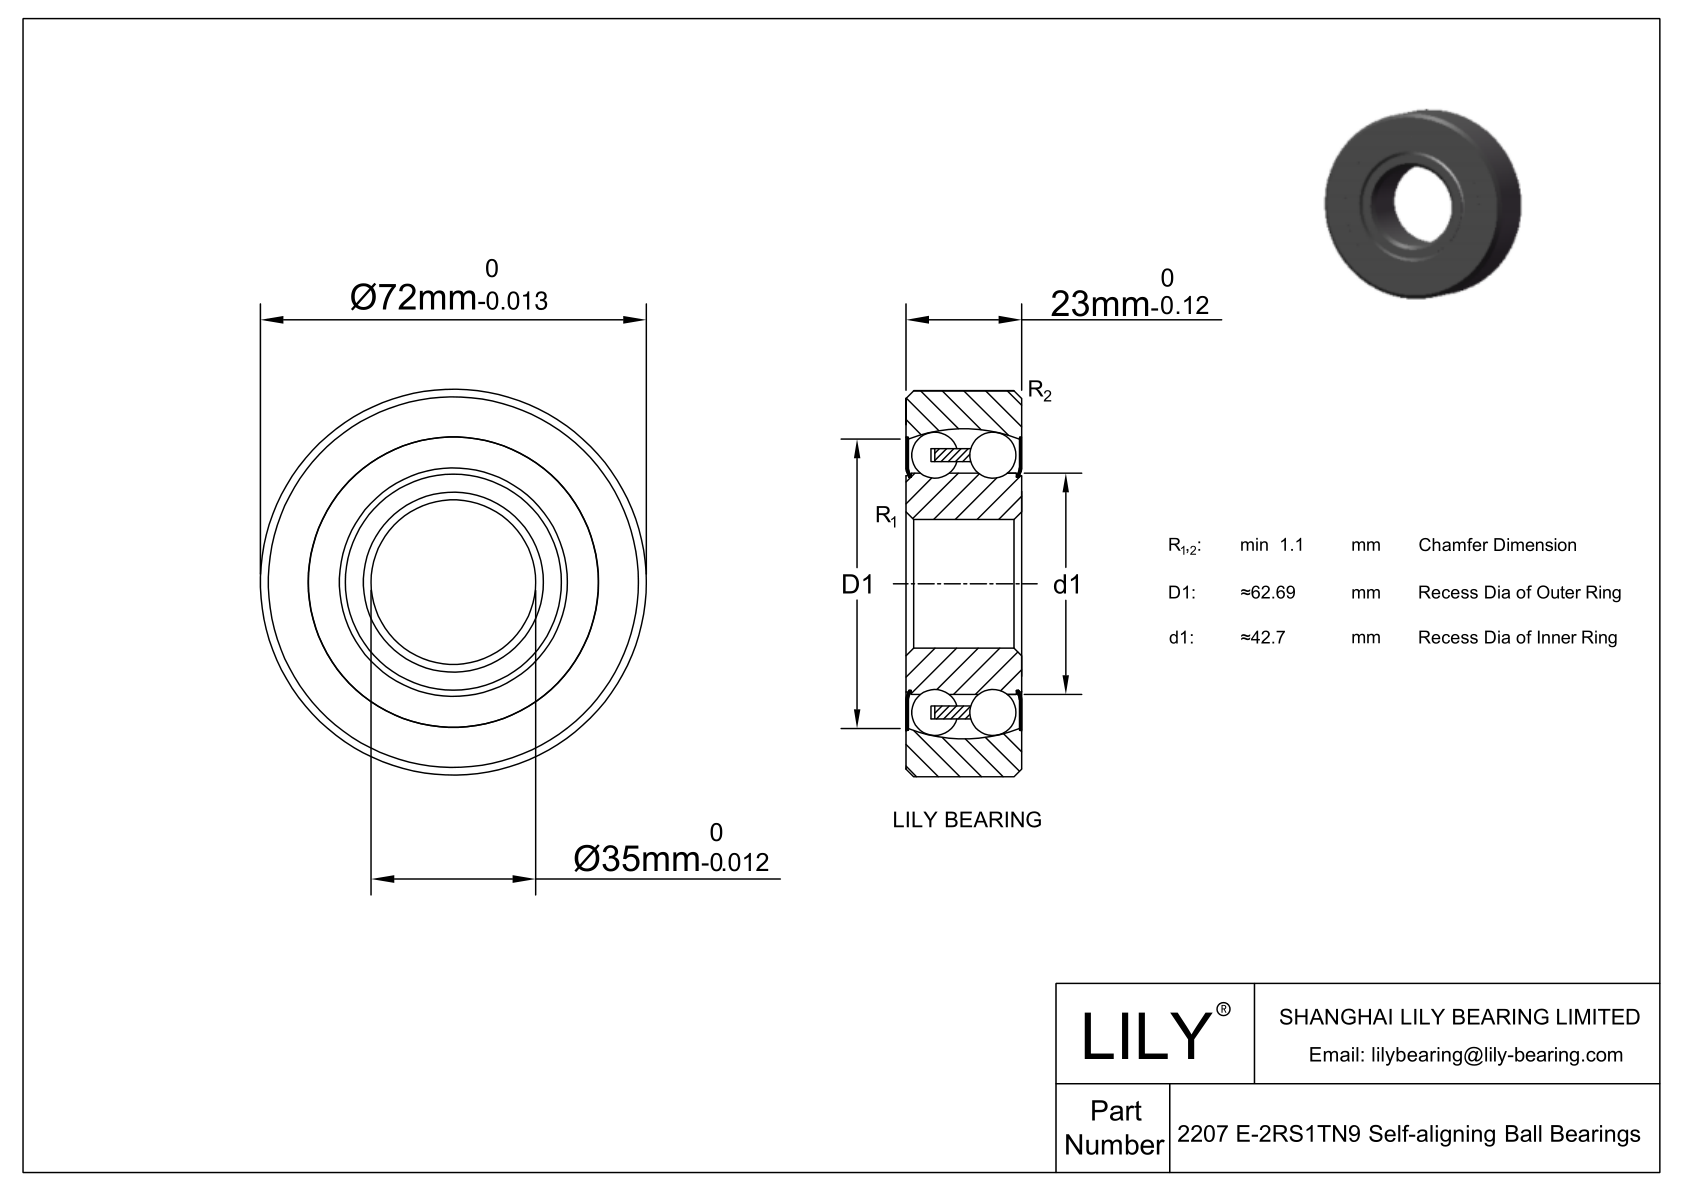 S2207 E-2RS1TN9 Stainless Steel Self Aligning Ball Bearings cad drawing